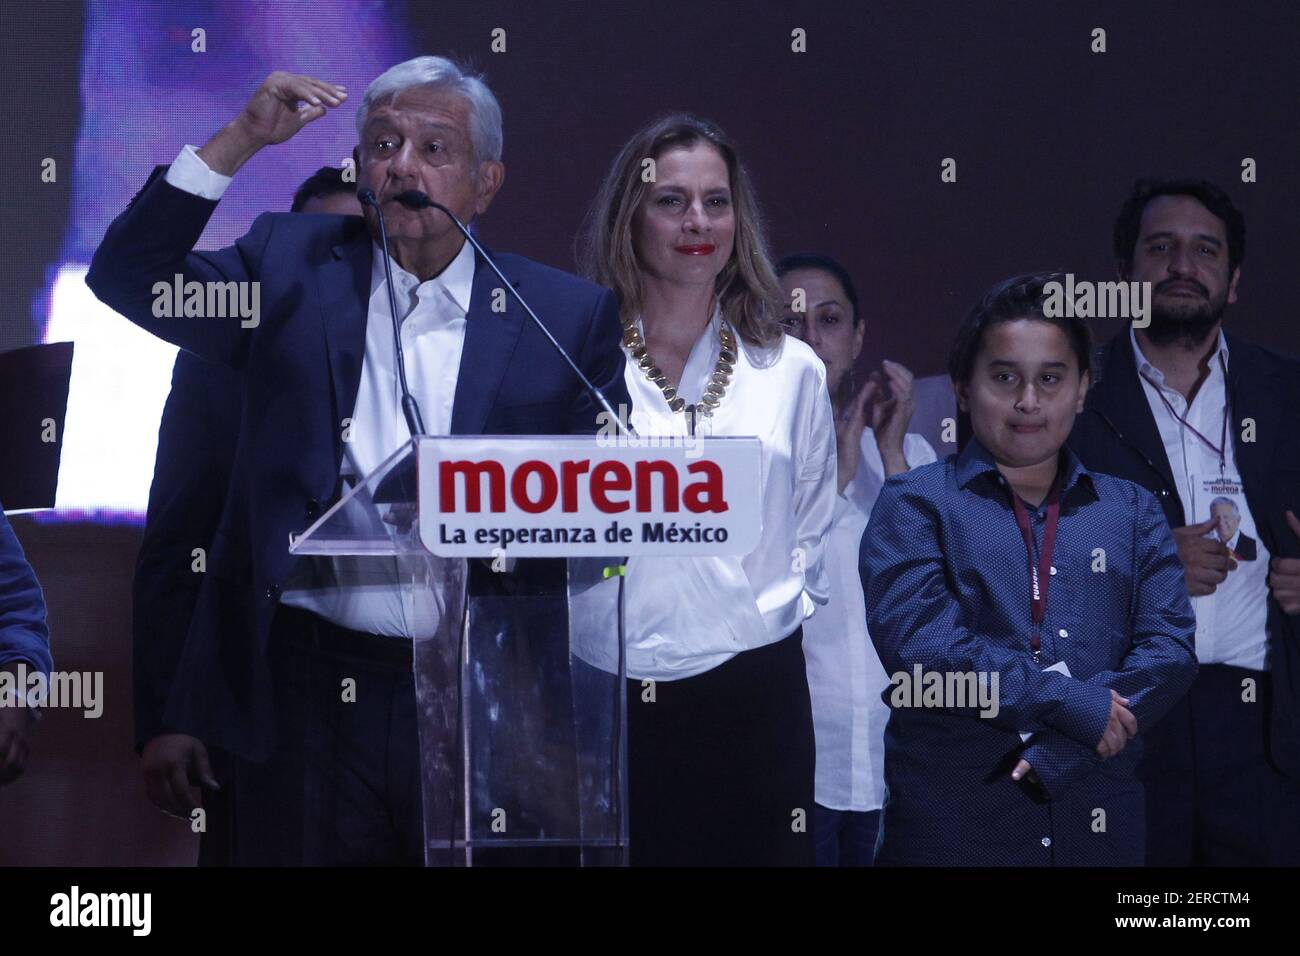 Andres Manuel Lopez Obrador Elected President of Mexico City and his wife Beatriz Gutiérrez Müller1 july 2018 (Photos by Liliana Ampudia Mendez/Sipa USA) Stock Photo